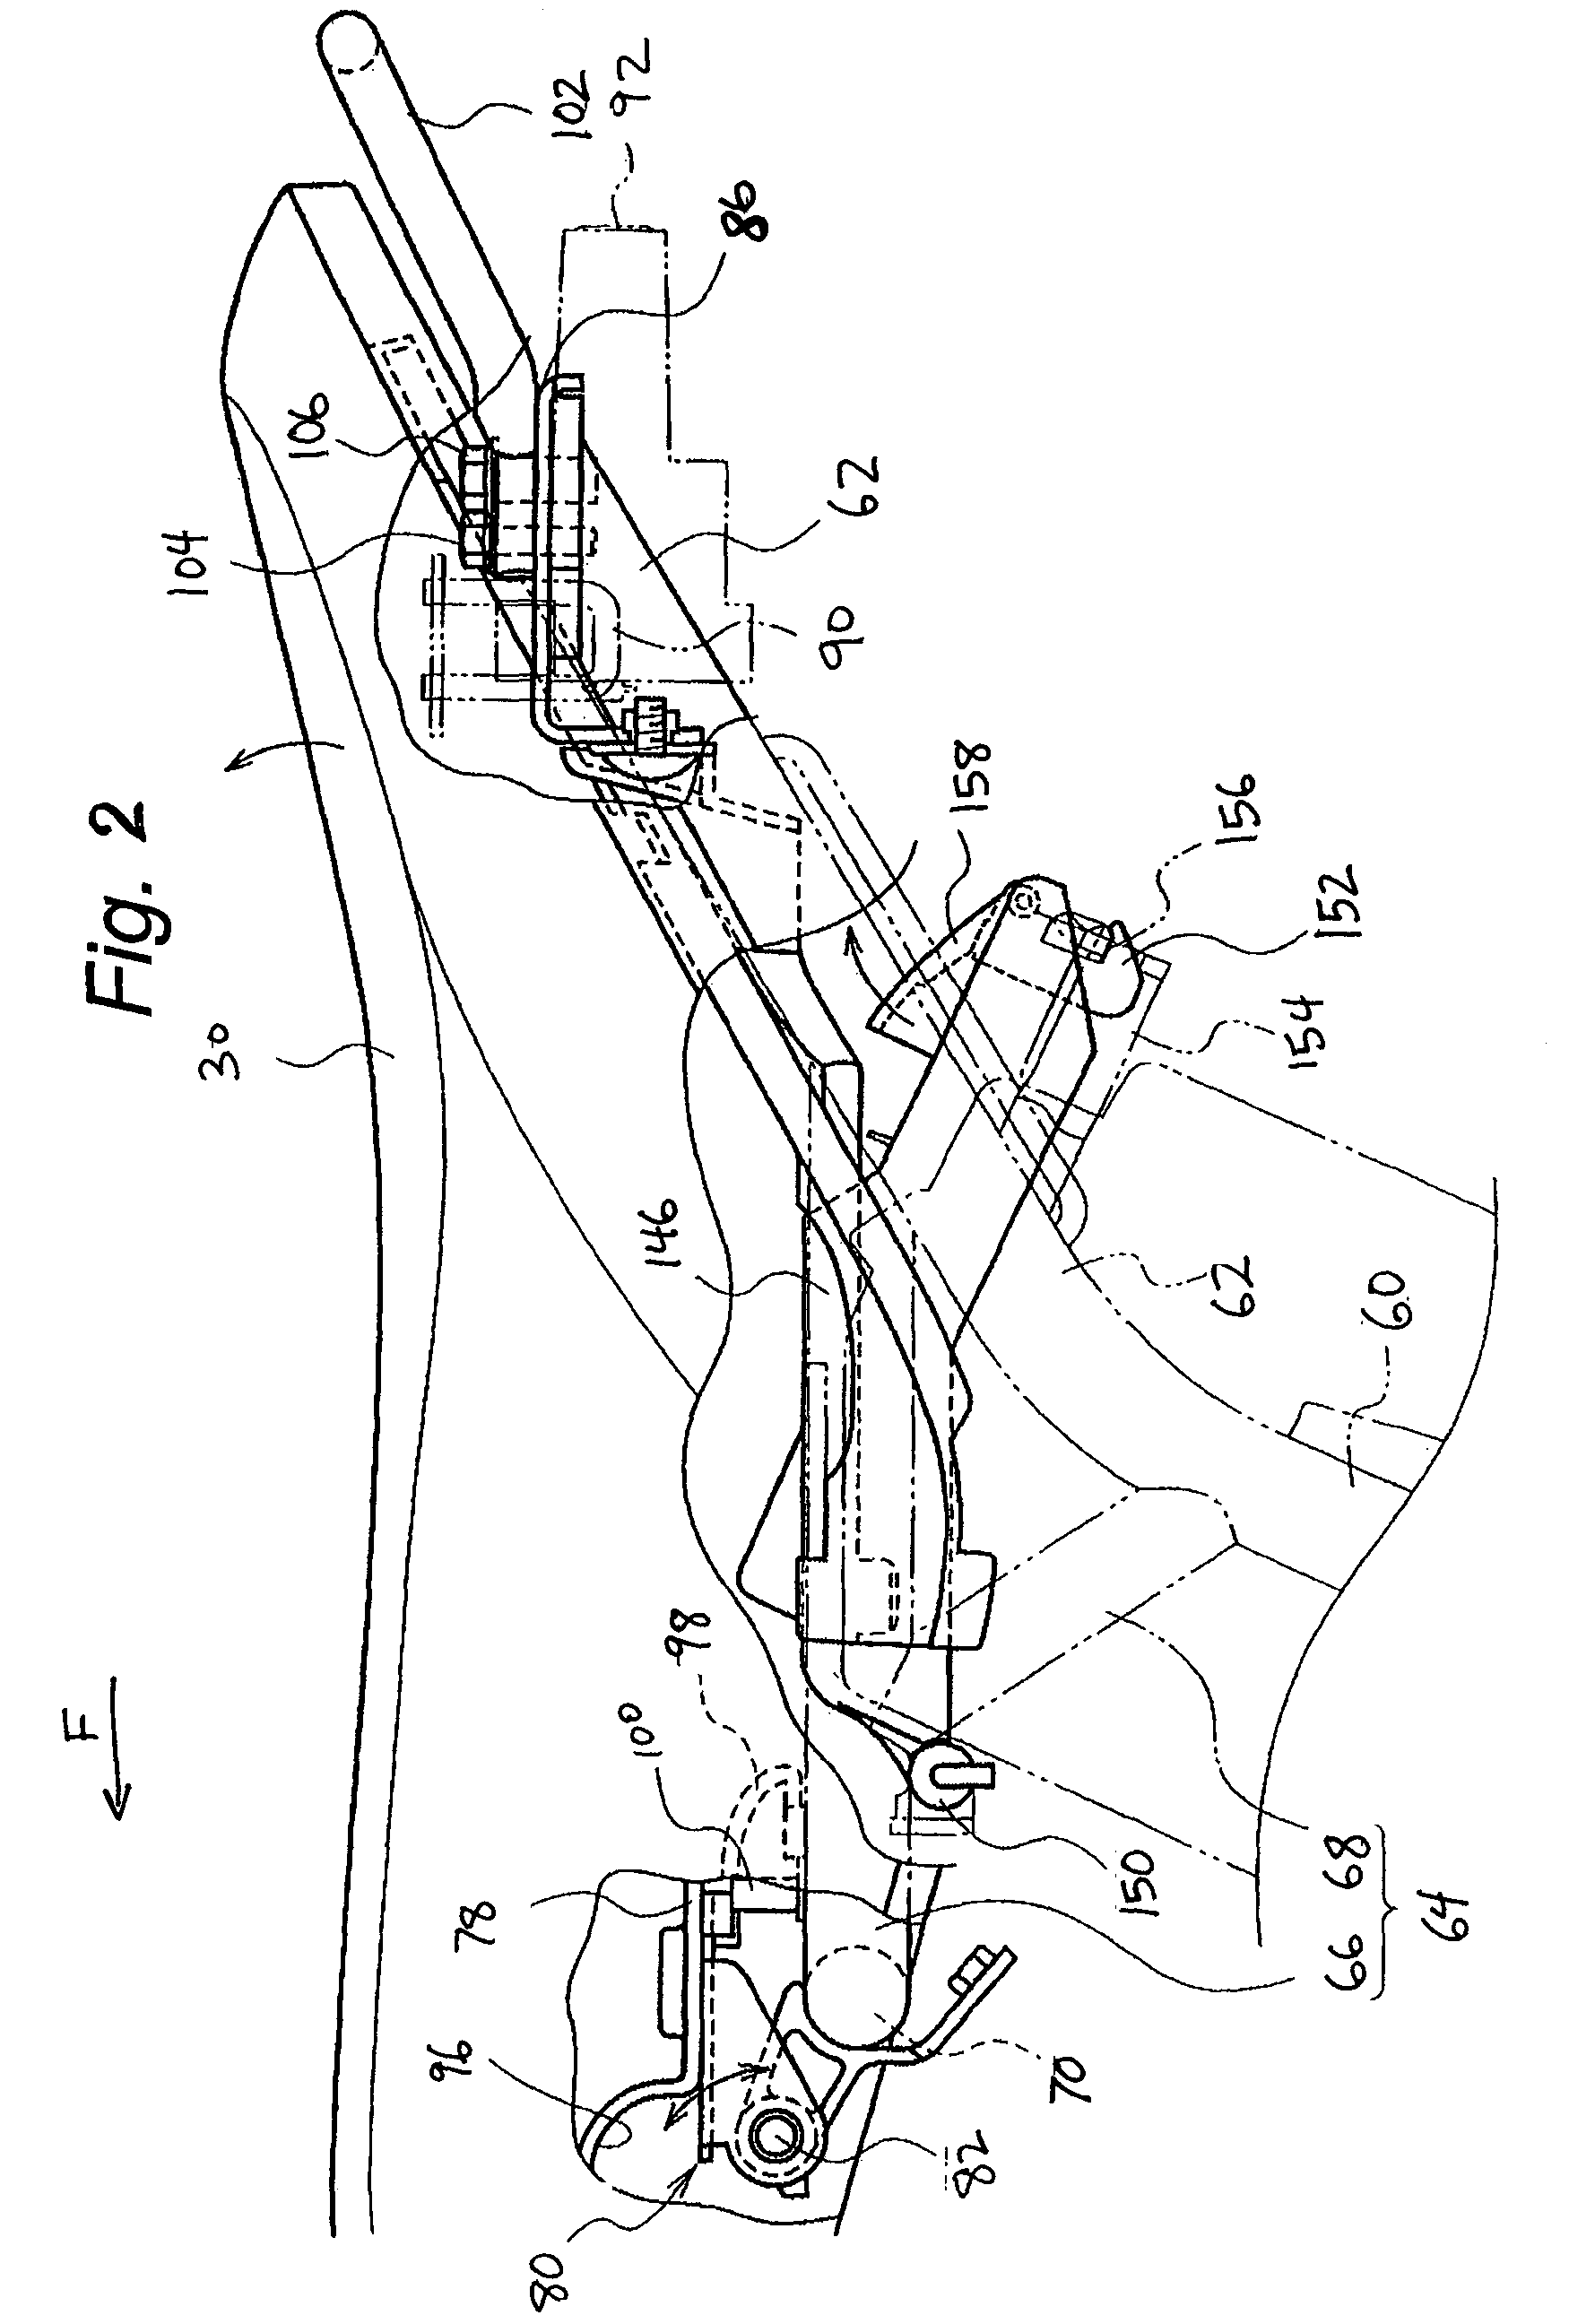 Battery mounting arrangement for electrically powered vehicle